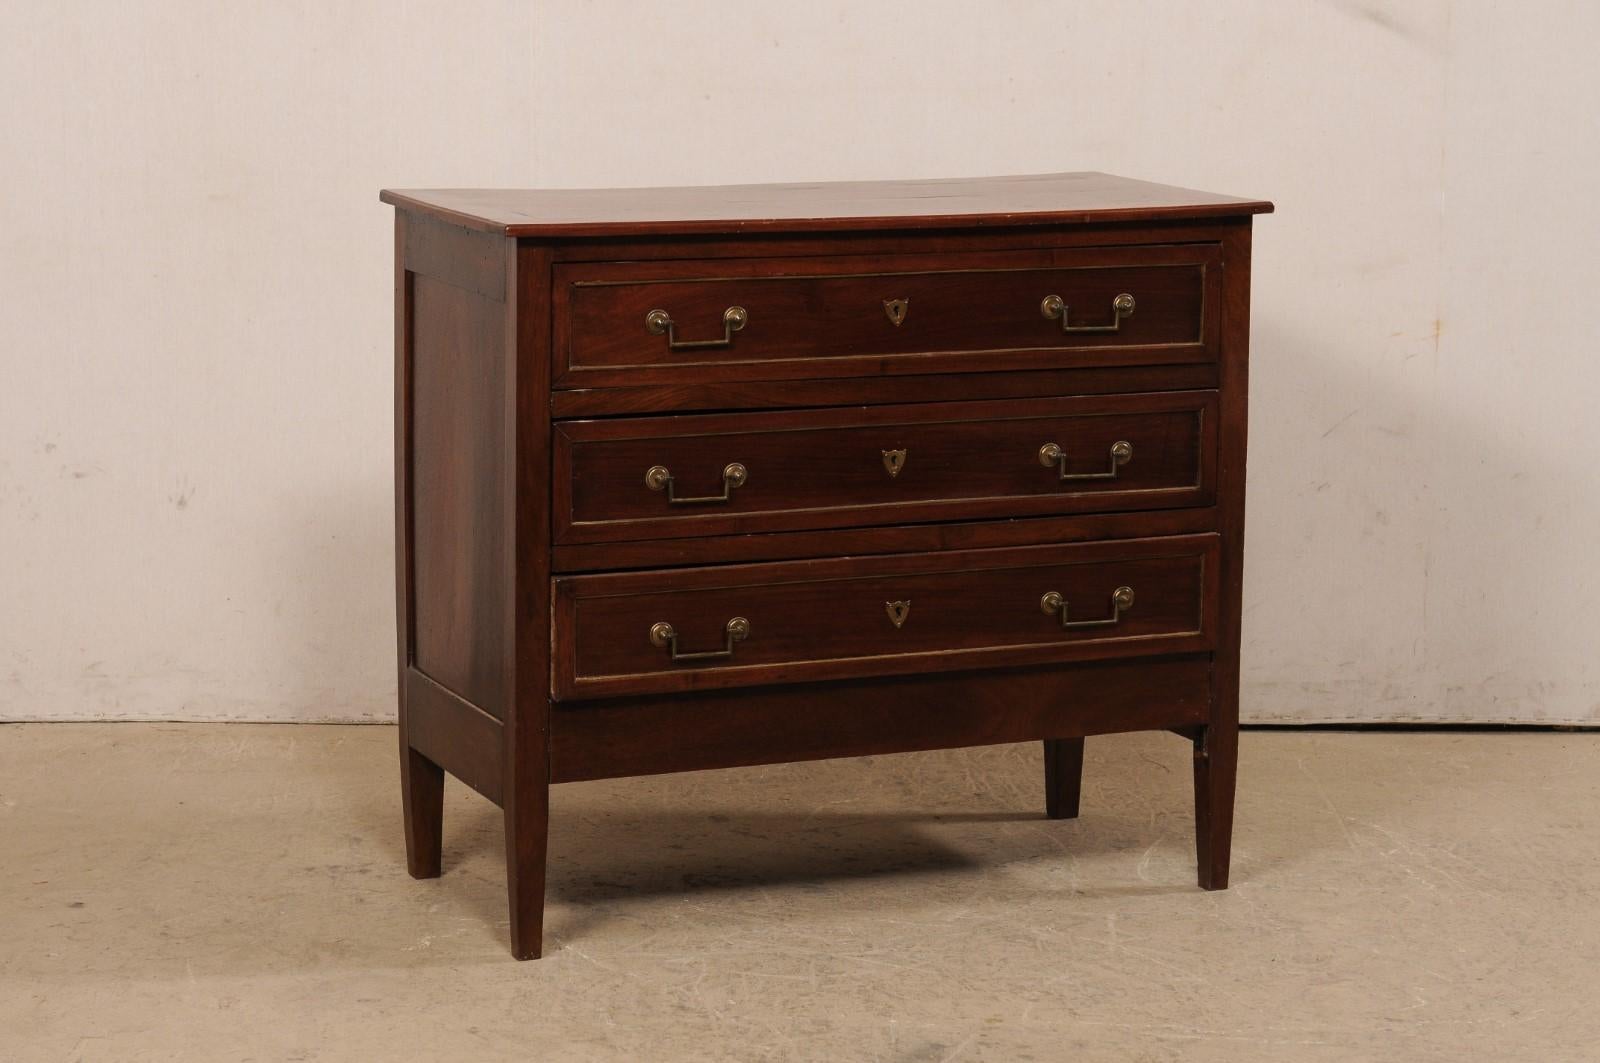 A French walnut chest of drawers from the 19th century. This antique chest from France has been designed in clean/straight lines and has a rectangular top over case which houses three dovetailed and graduated drawers. It is presented upon four